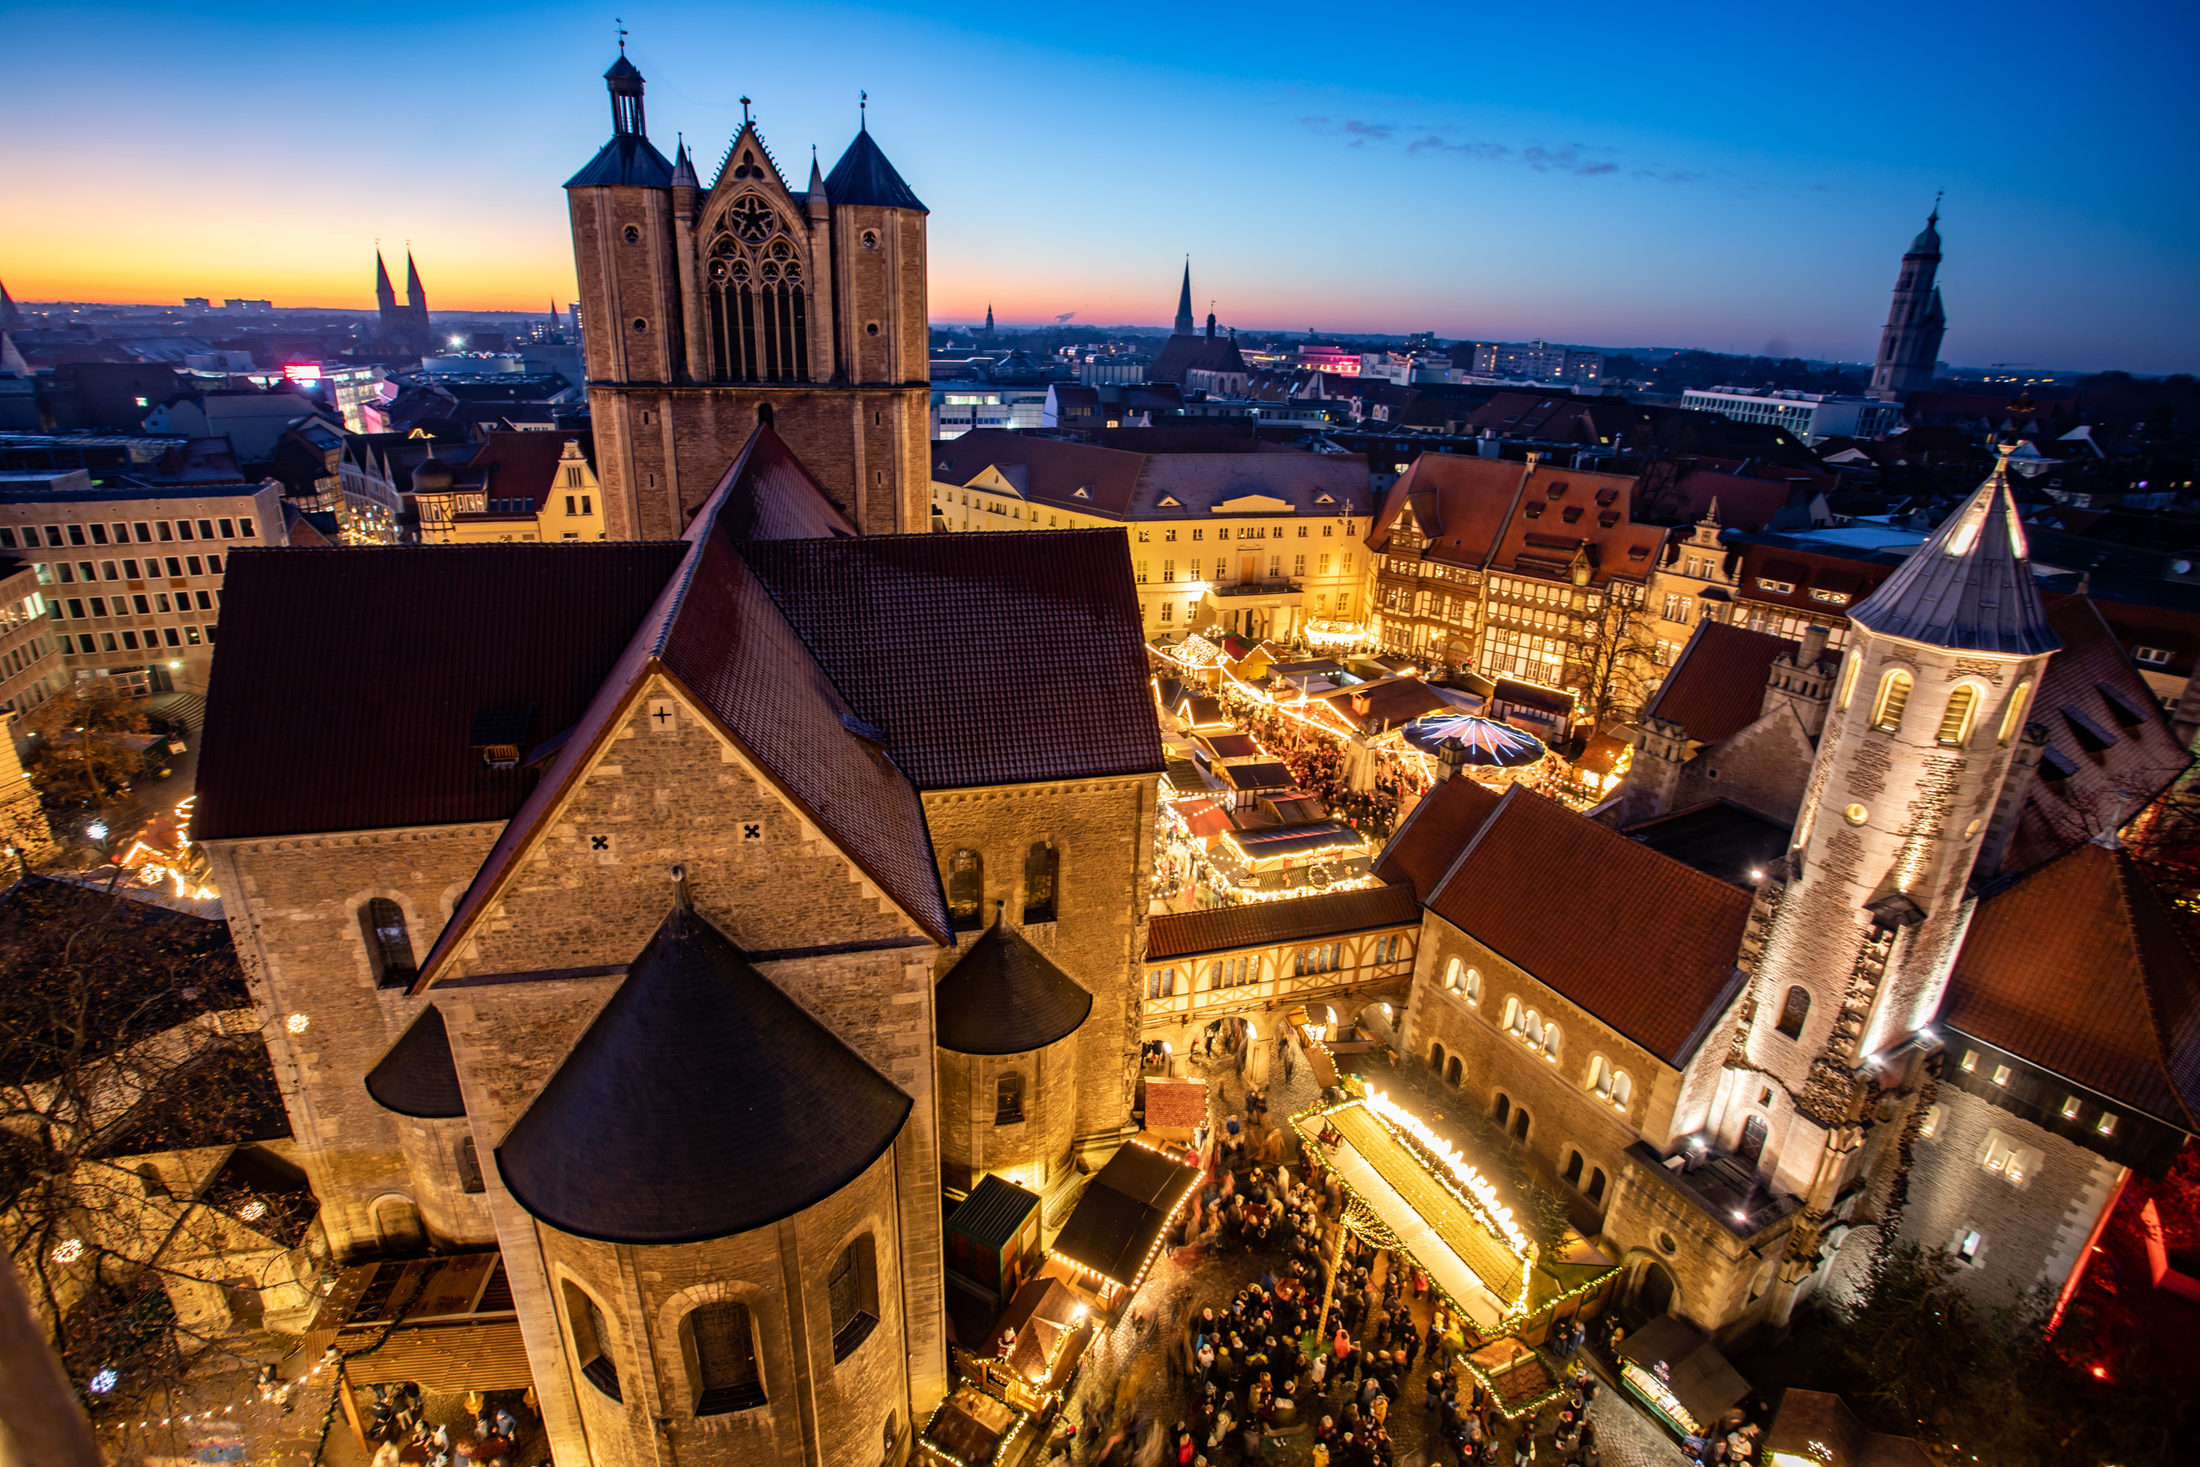 Braunschweig Christmas Market from above (Zoom on click)